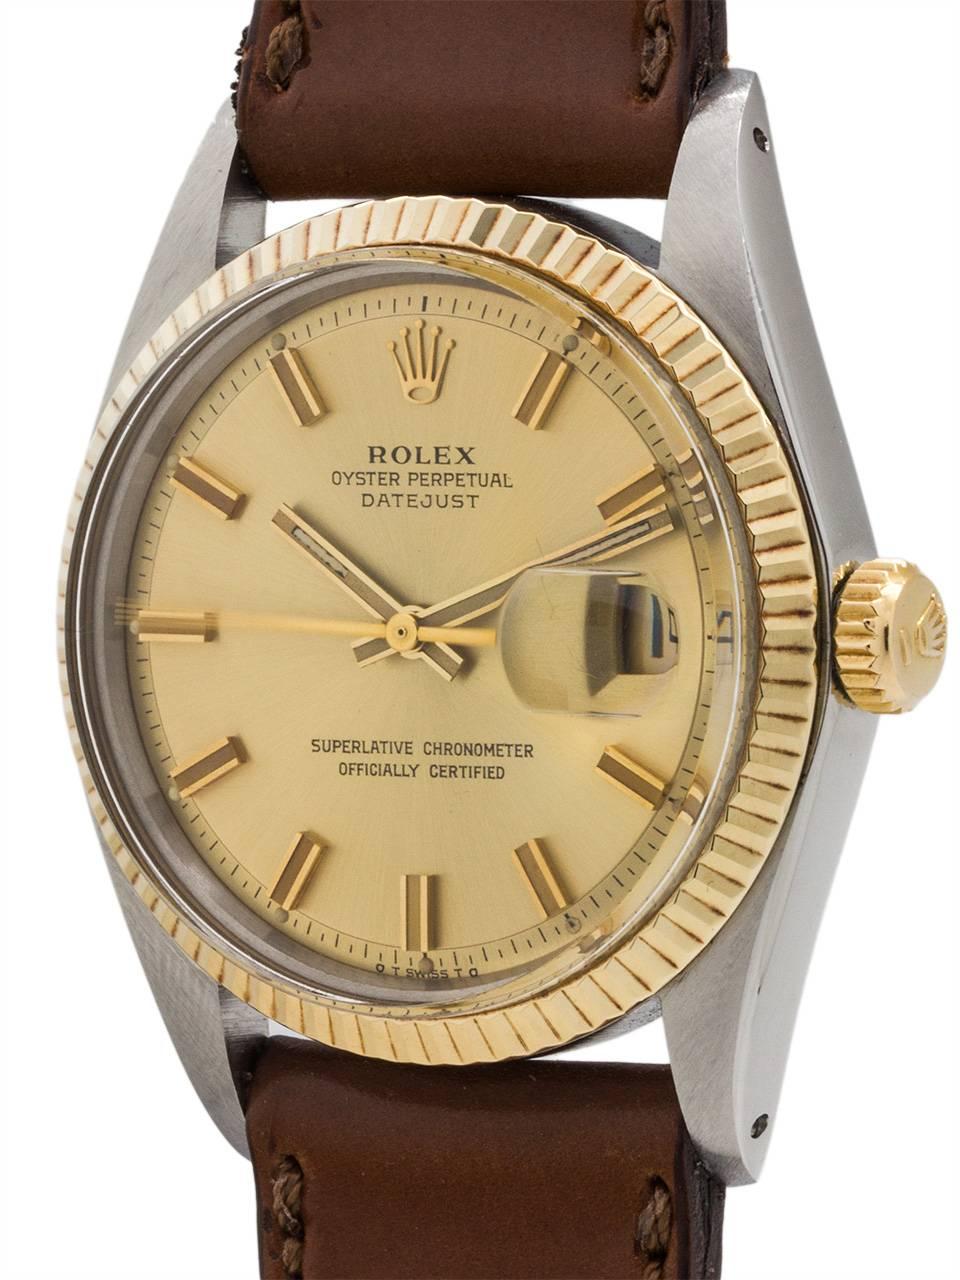 
Vintage Rolex Datejust ref 1601, stainless steel & 14k yellow gold case with a 3.5 million serial number, circa 1973. Featuring 36mm diameter case, with 14k yellow gold fluted bezel, and acrylic crystal. Original champagne pie pan dial with